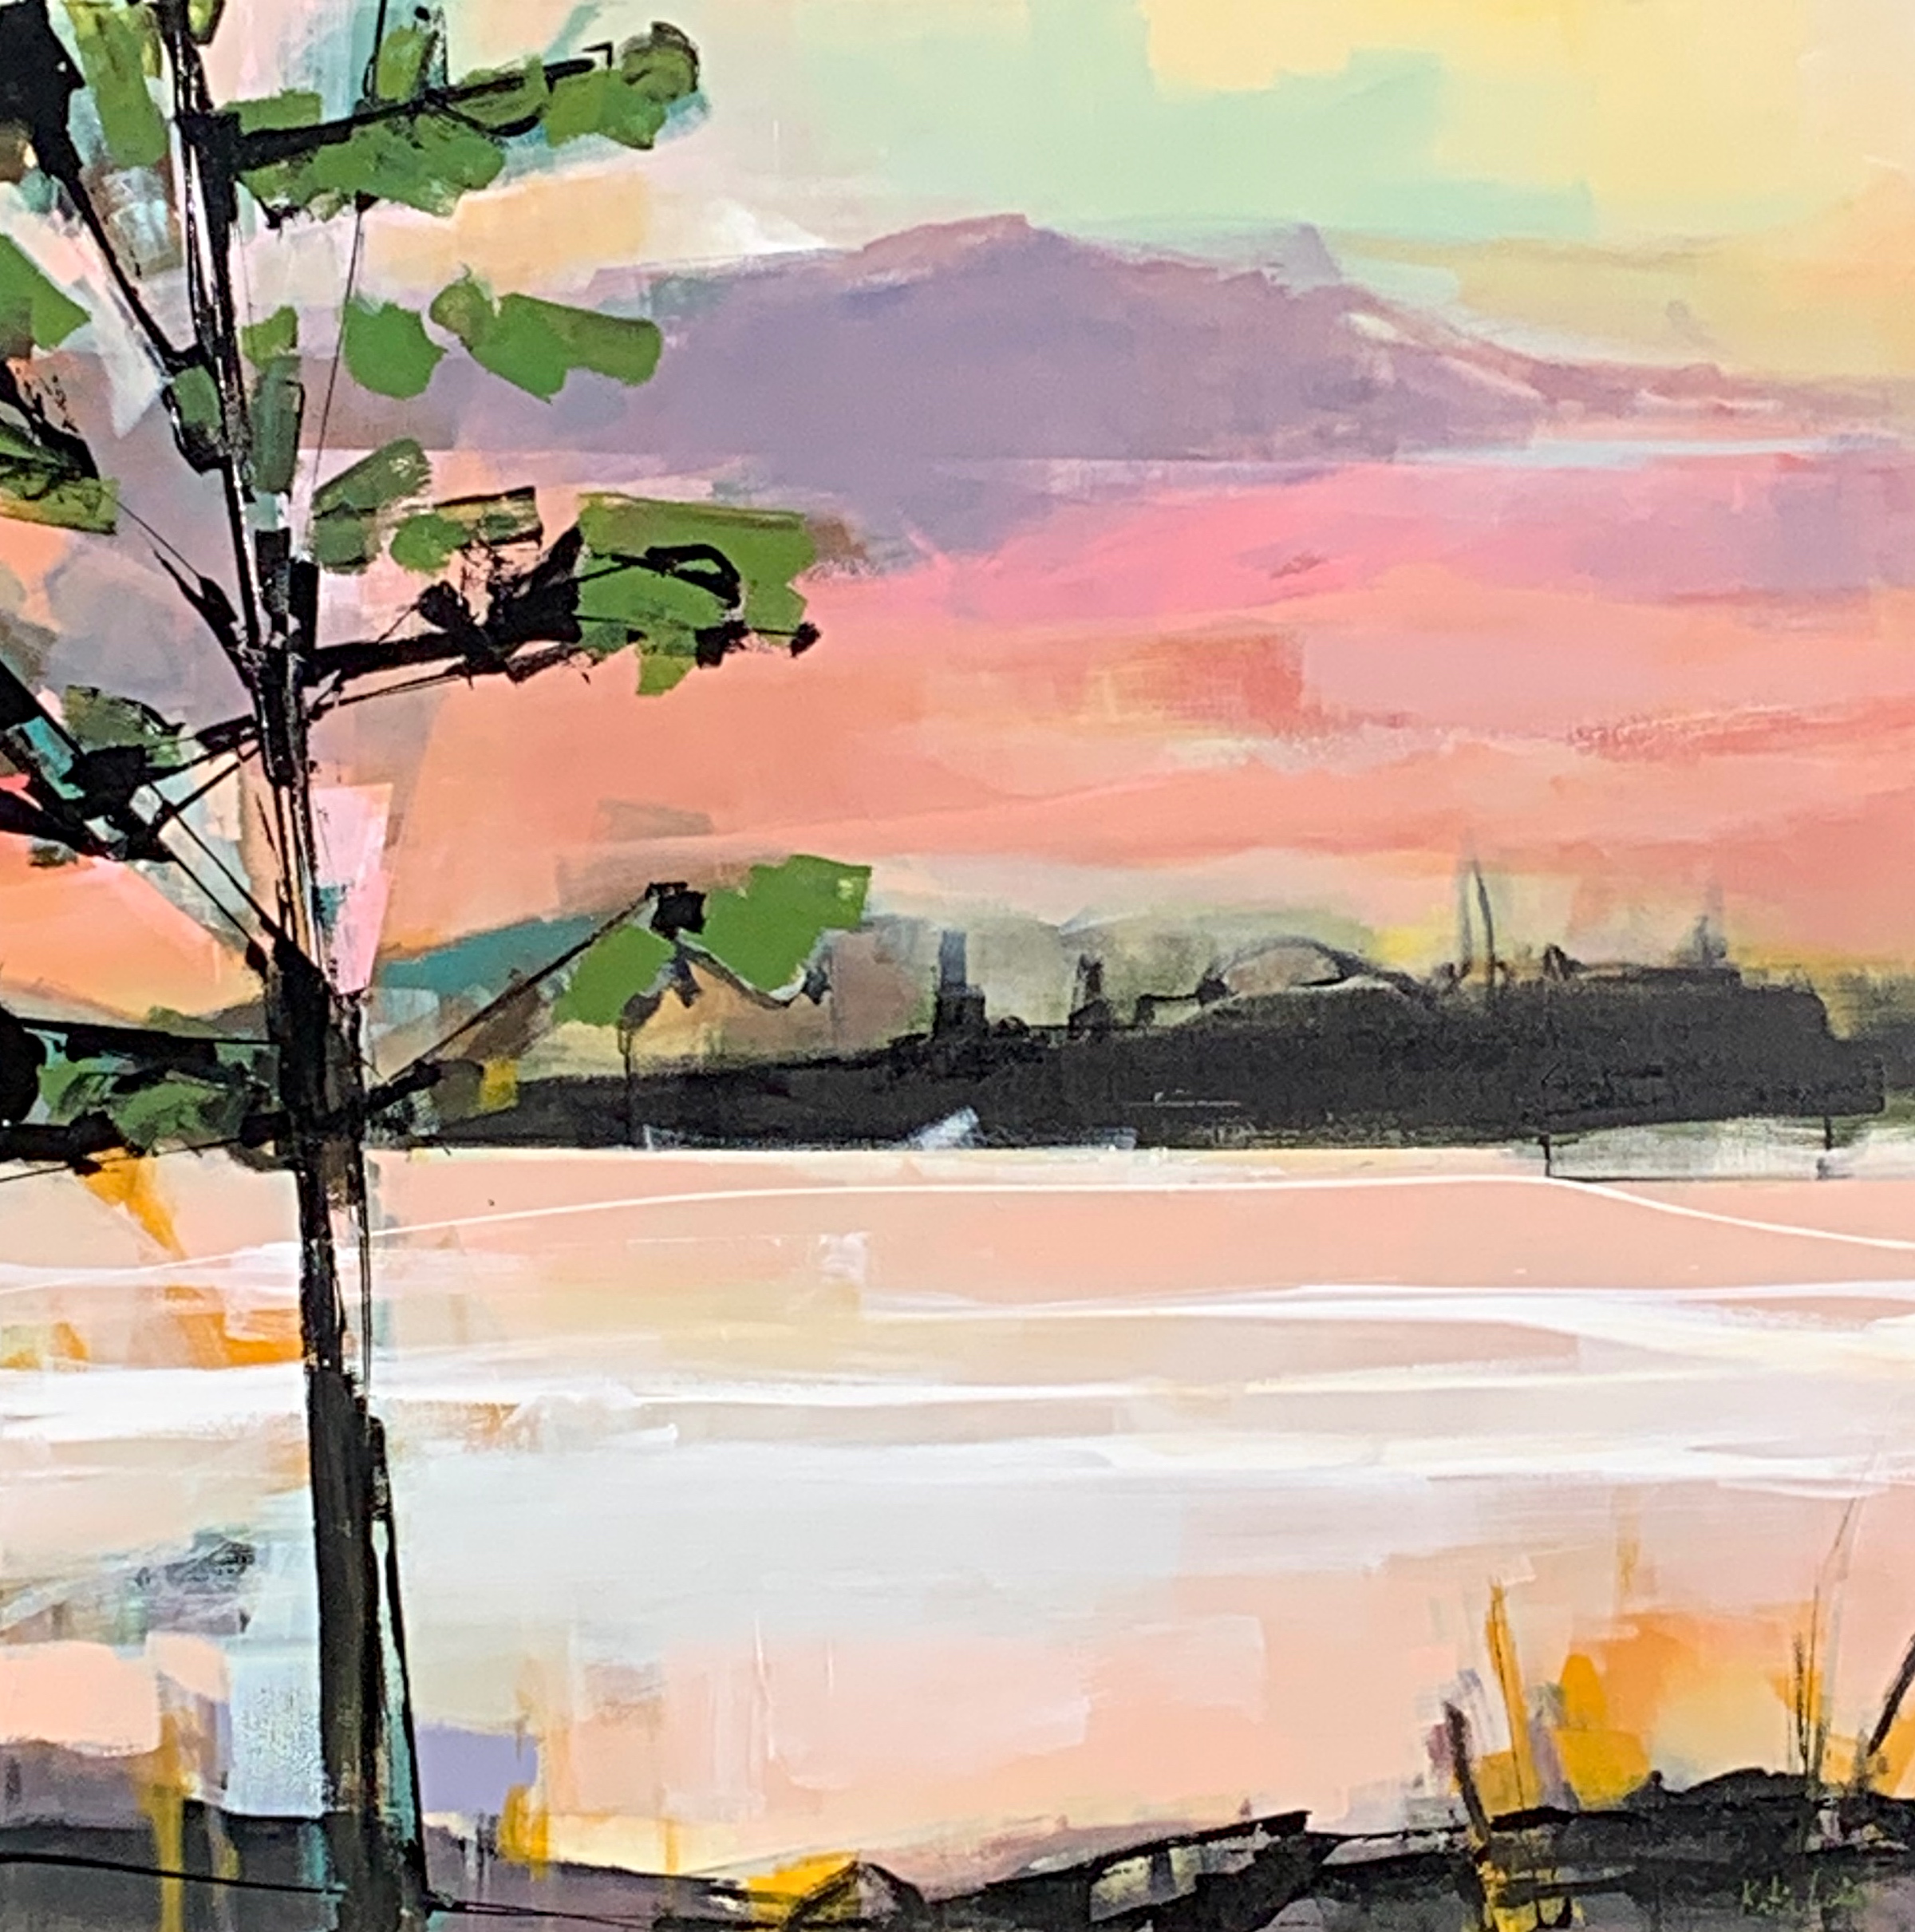 Fresh, original acrylic sunset landscape painting by Canadian artist Katie Lois at Effusion Art Gallery in Invermere, BC.